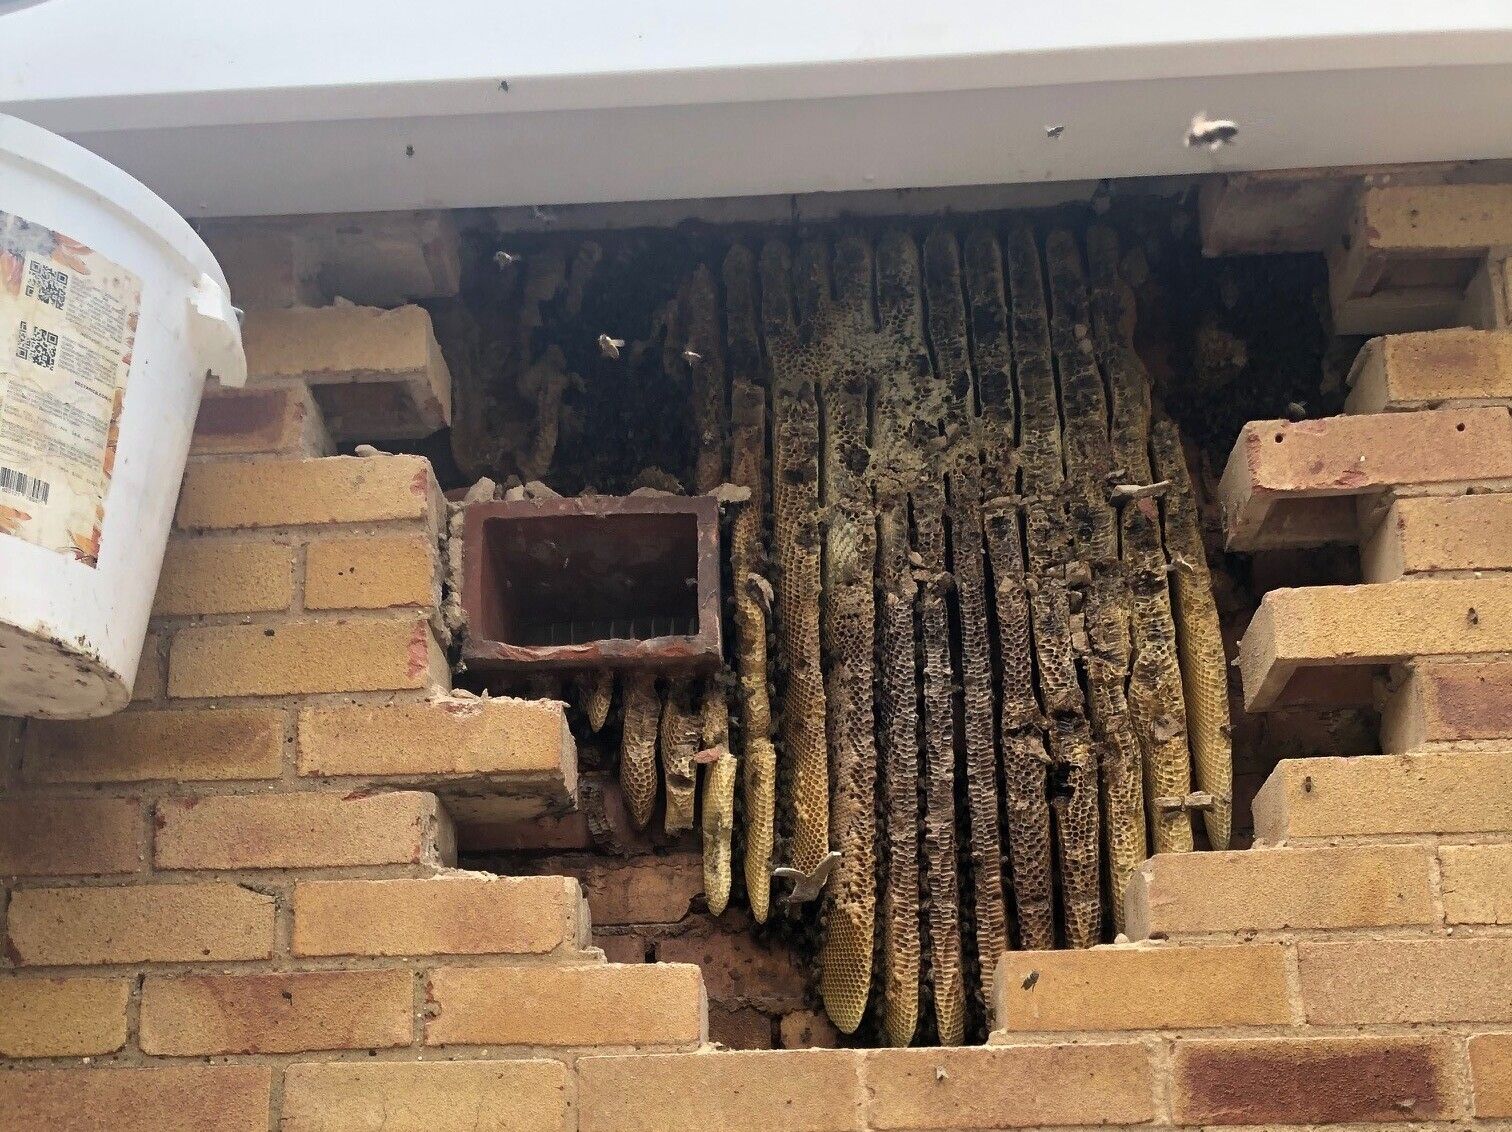 Honey bee hive behind some bricks in a wall